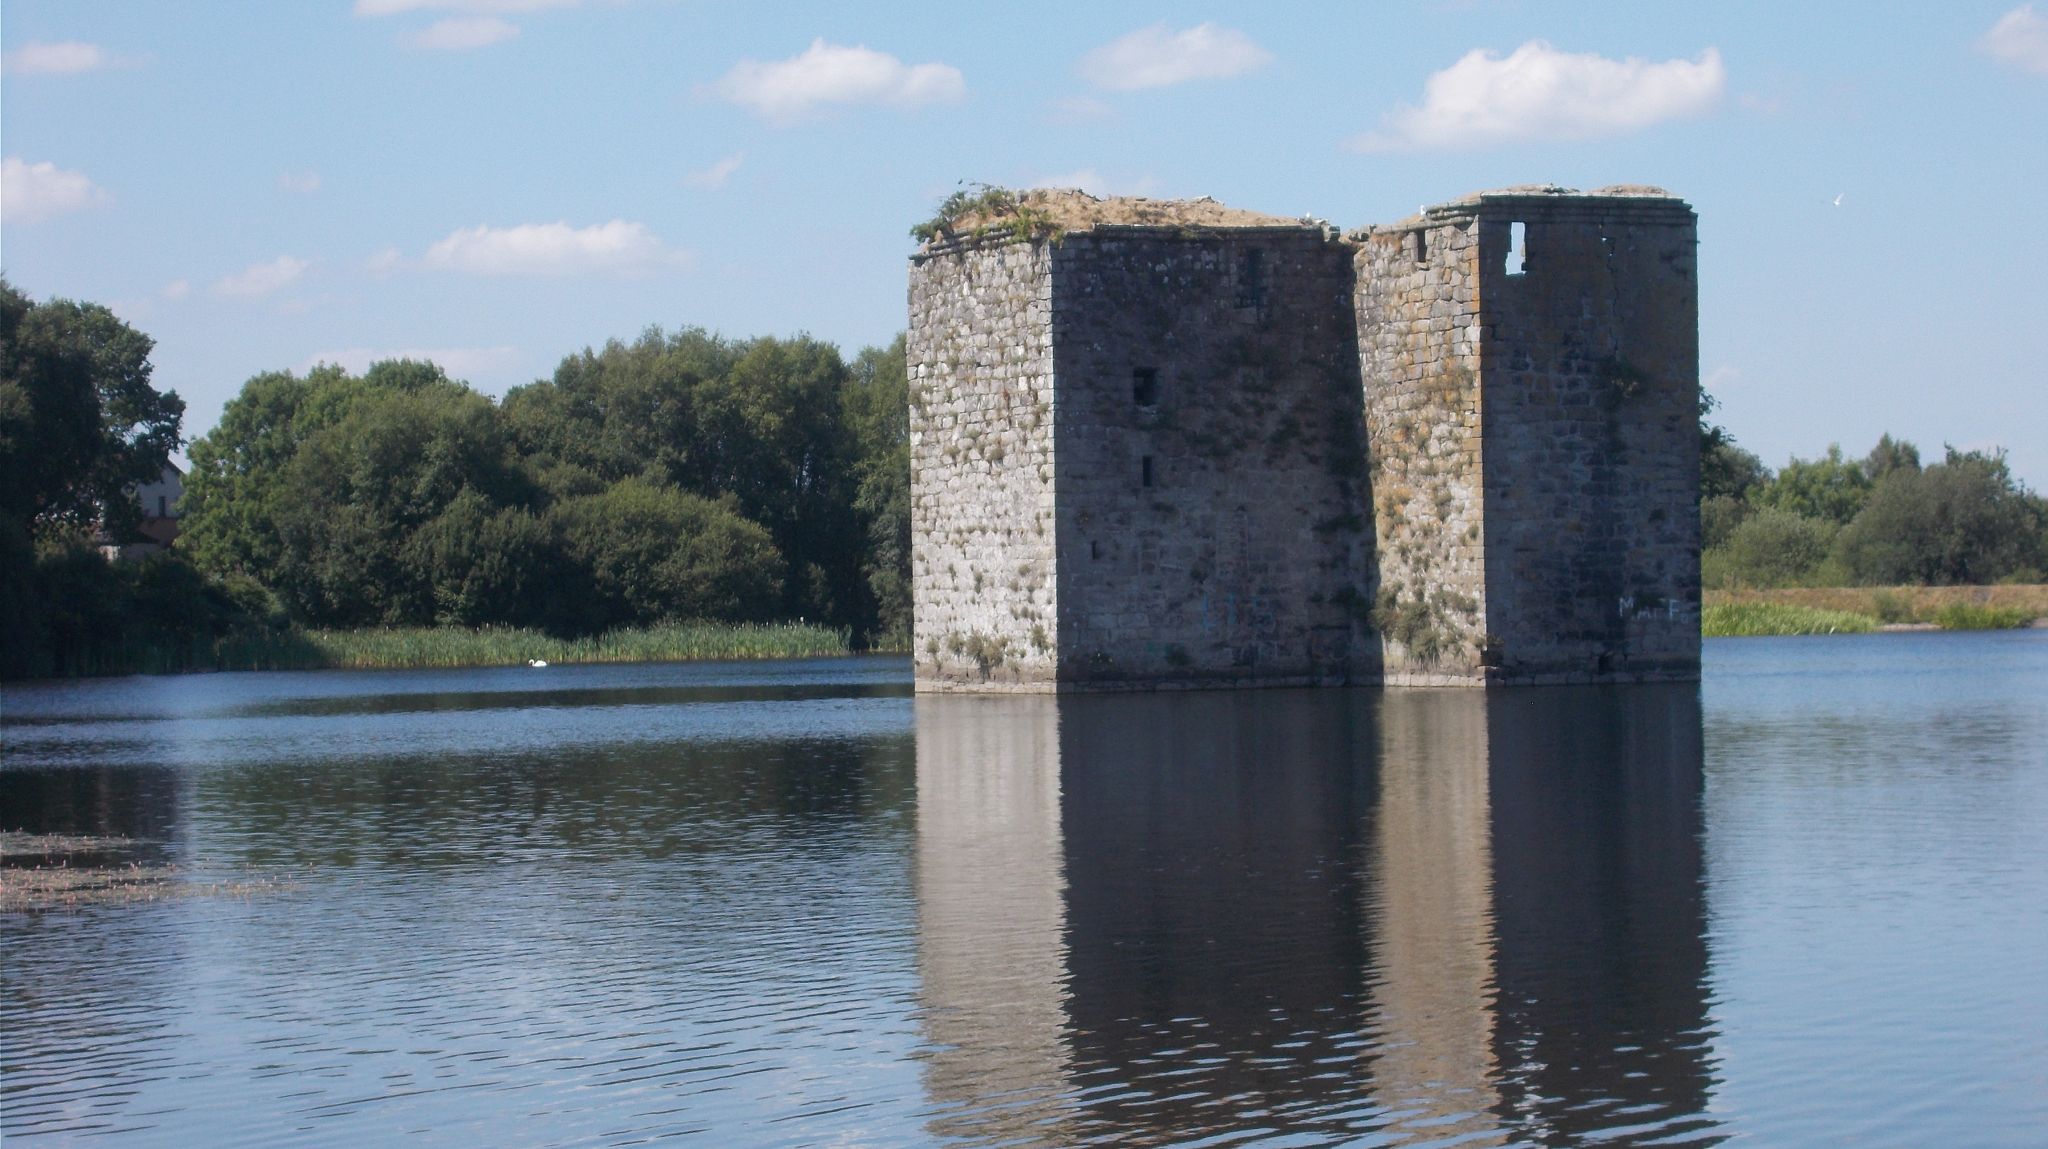 Stanely Castle in Stanely Reservoir